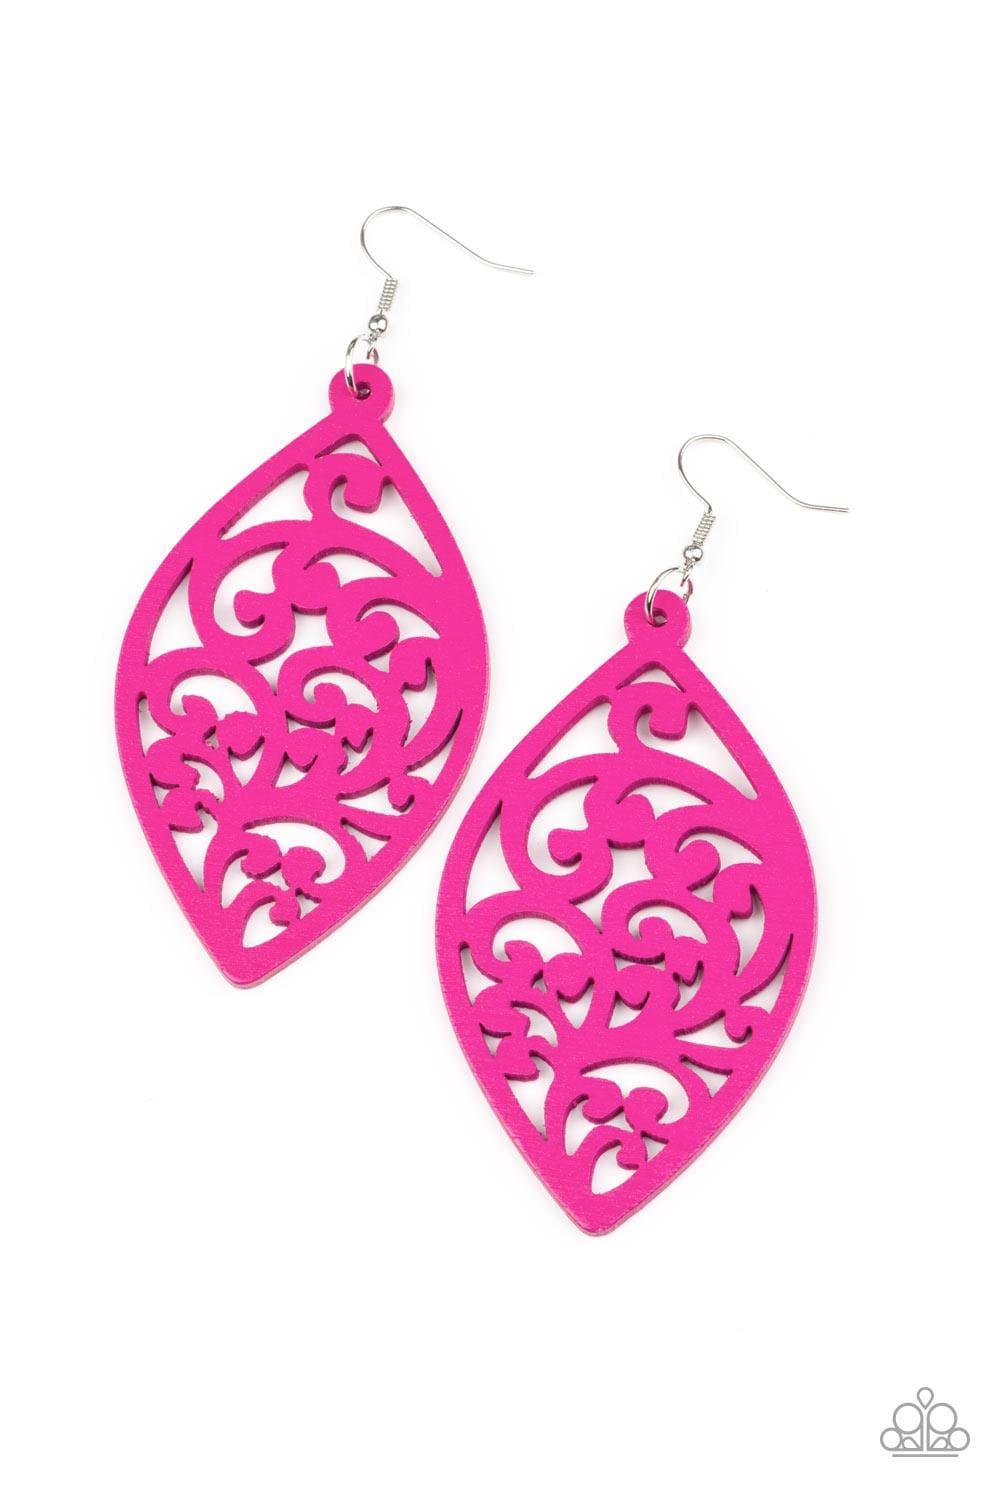 Paparazzi Accessories - Coral Garden - Pink Earrings - Bling by JessieK